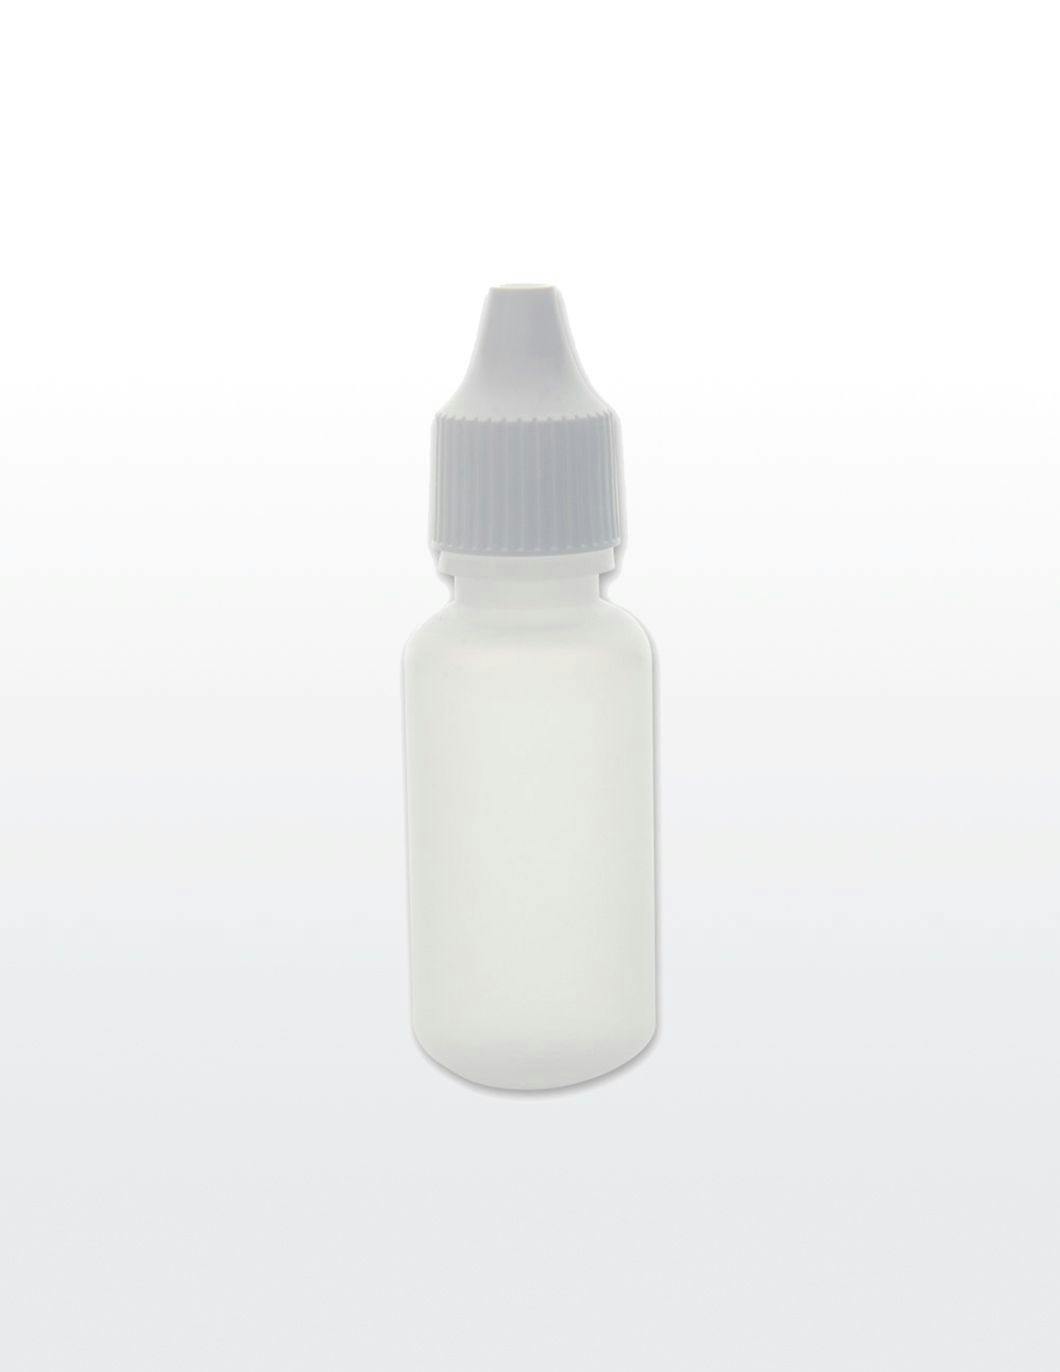 ophthalmic-bottles-15ml-with-60-dropper-opening-alt